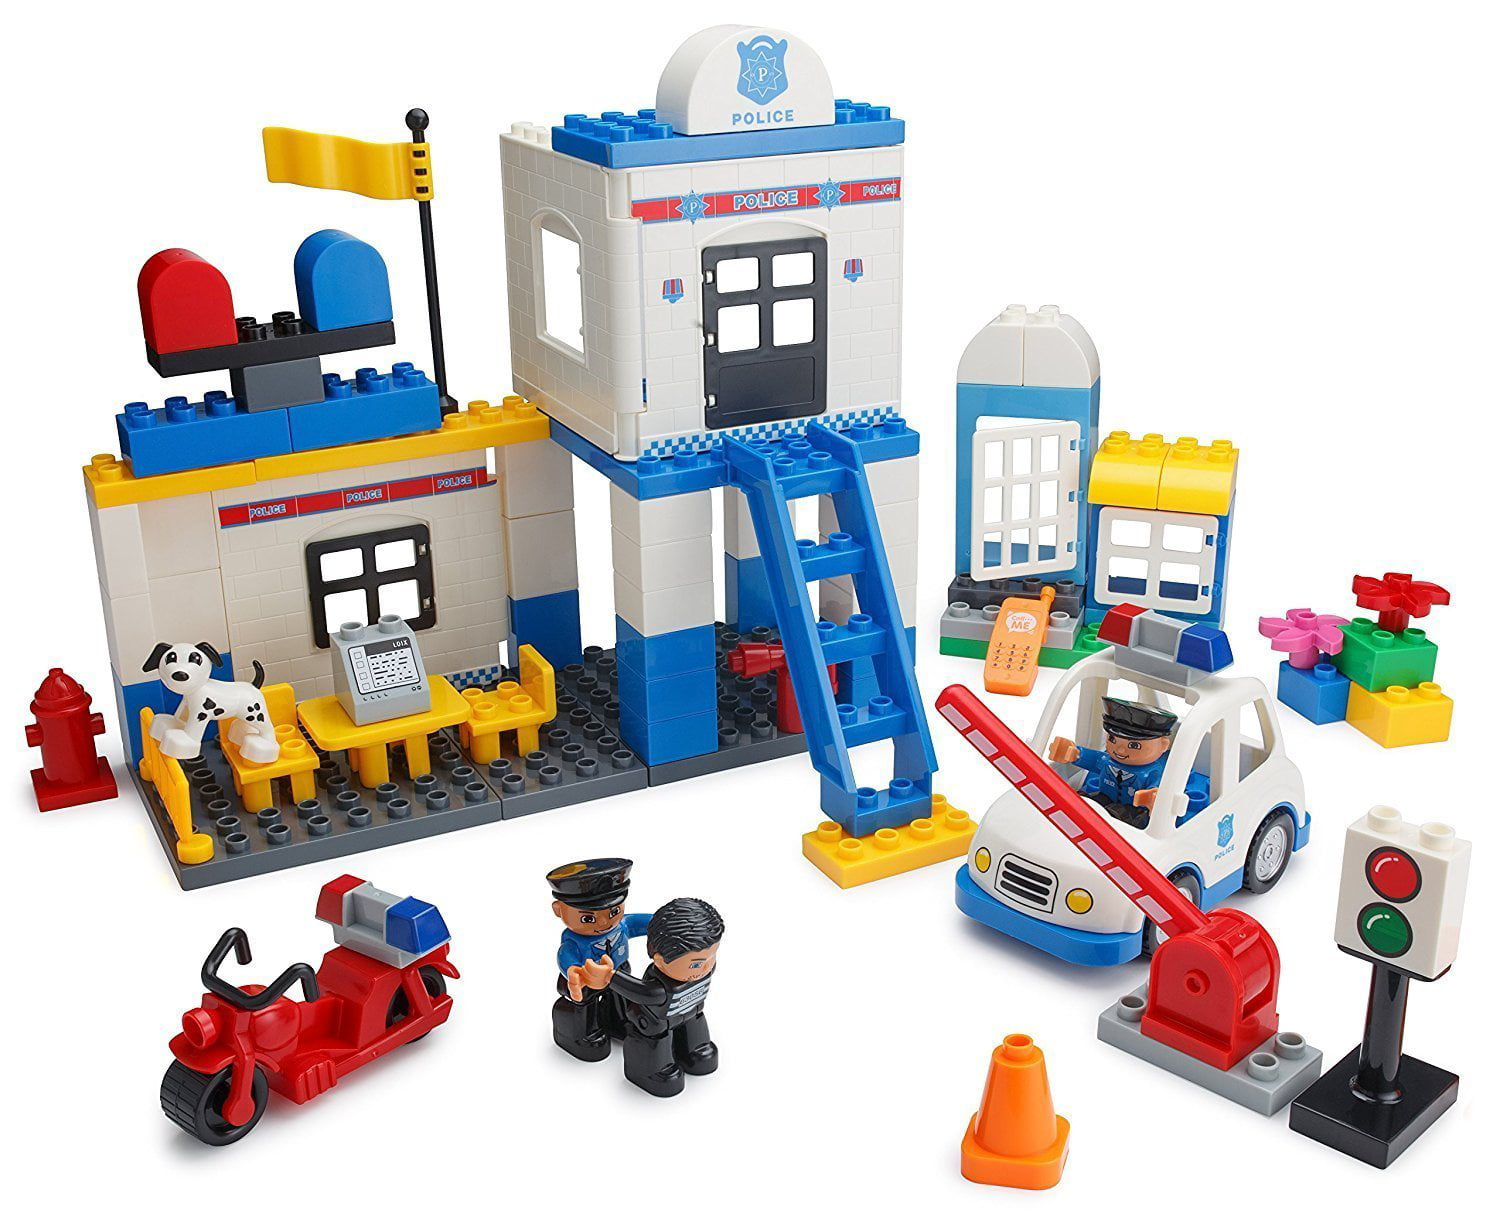 Details about   Urban Police Station-Mountain Special Police Building blocks 890pcs no box 